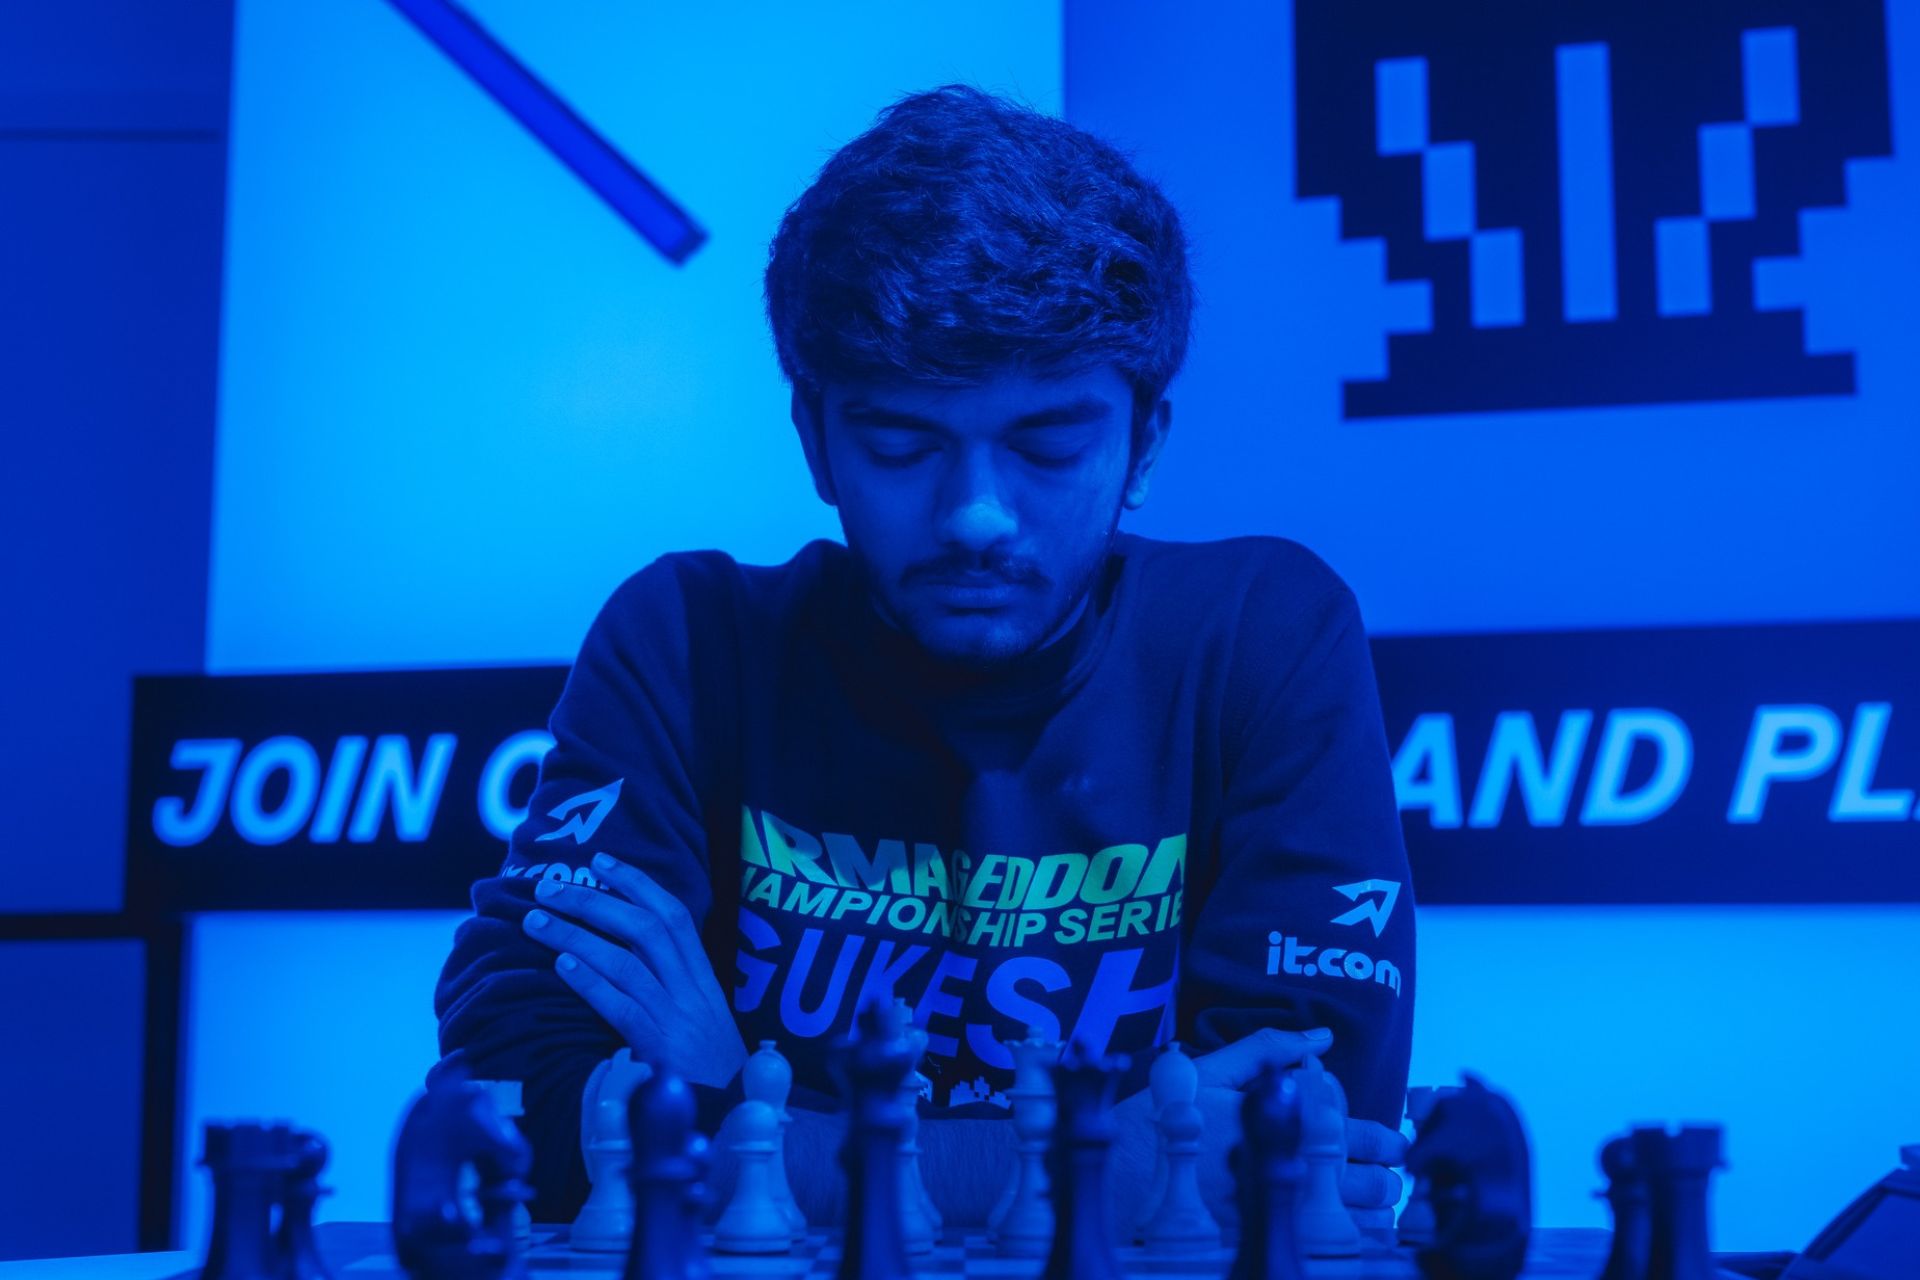 Gukesh D is fourth youngest player ever to cross 2700 – Chessdom